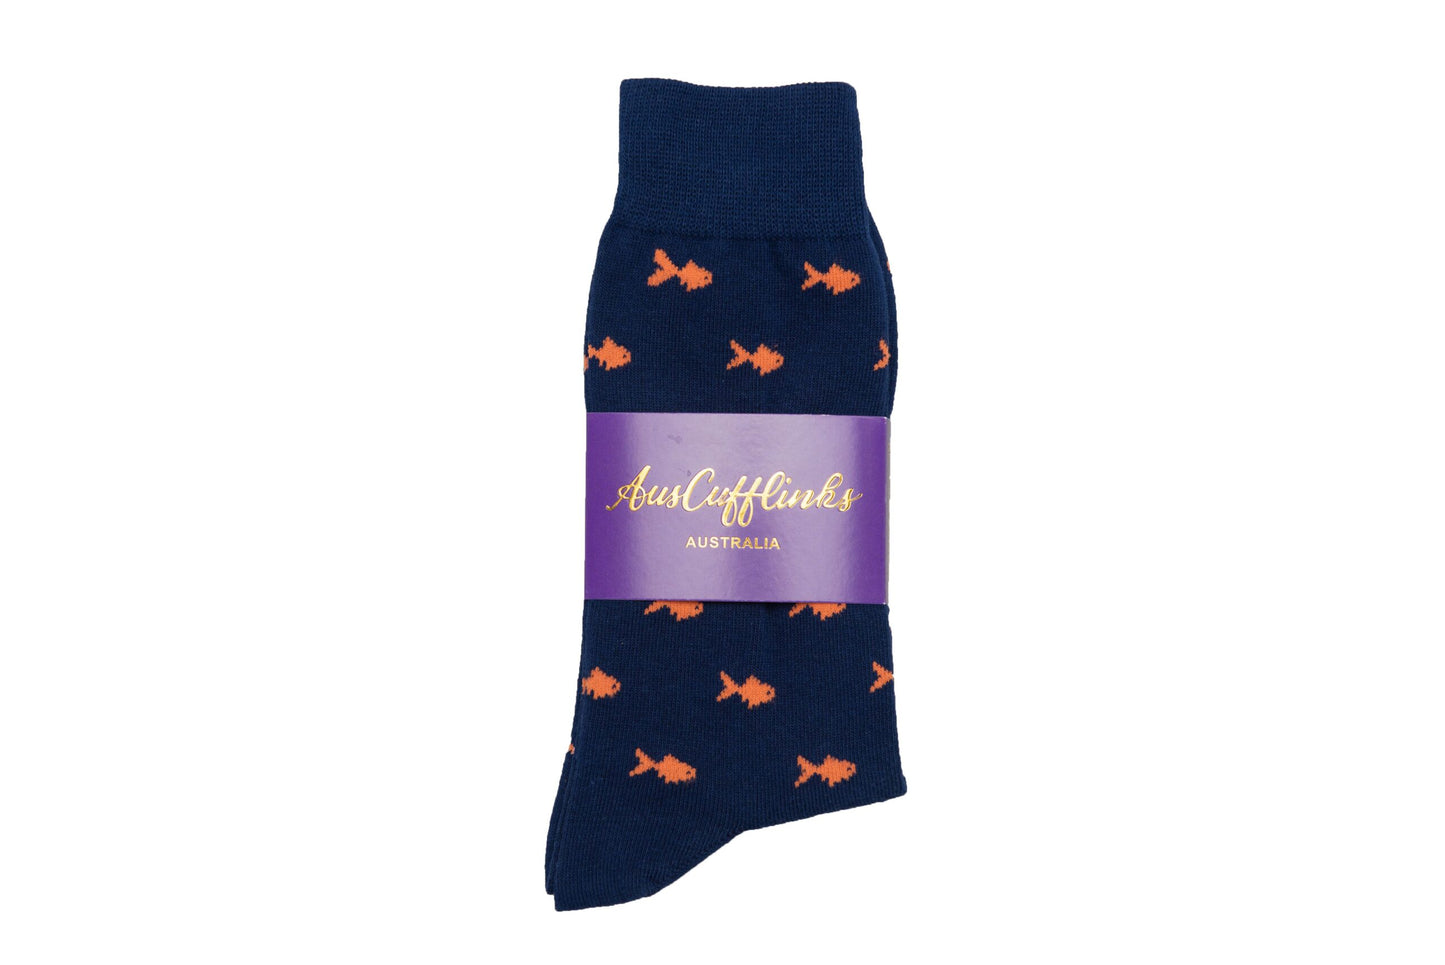 A blue sock with Gold Fish Socks on it. The perfect addition to your collection of vibrant socks.